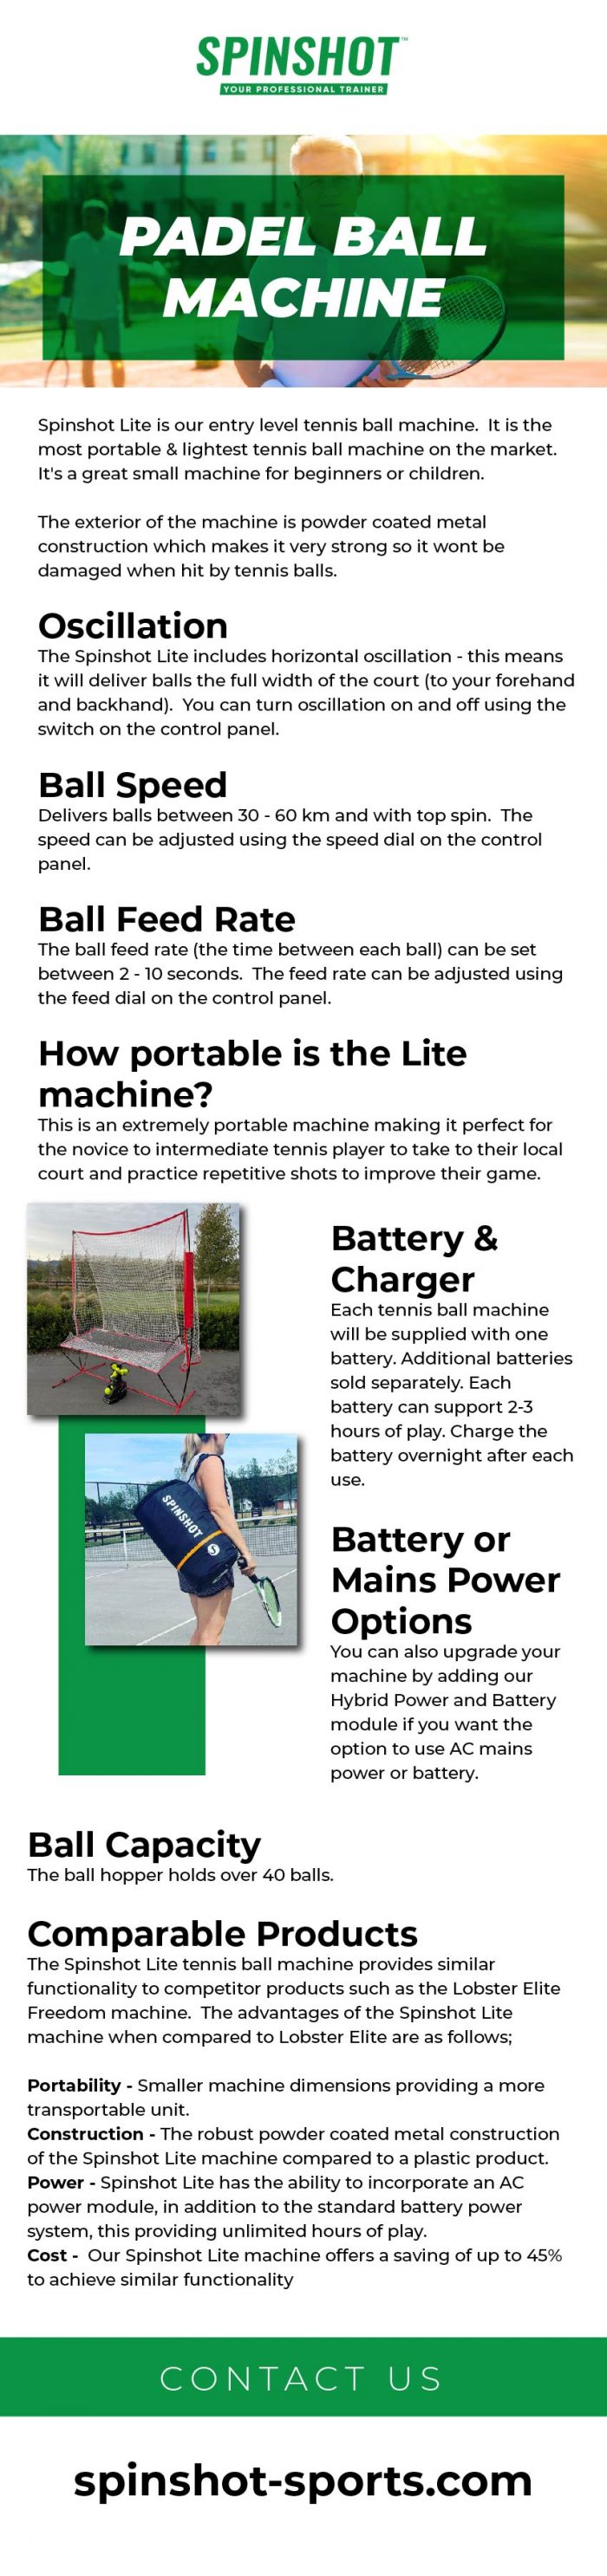 Looking for a Padel Ball Machine? Shop for it at SpinShot Sports AU